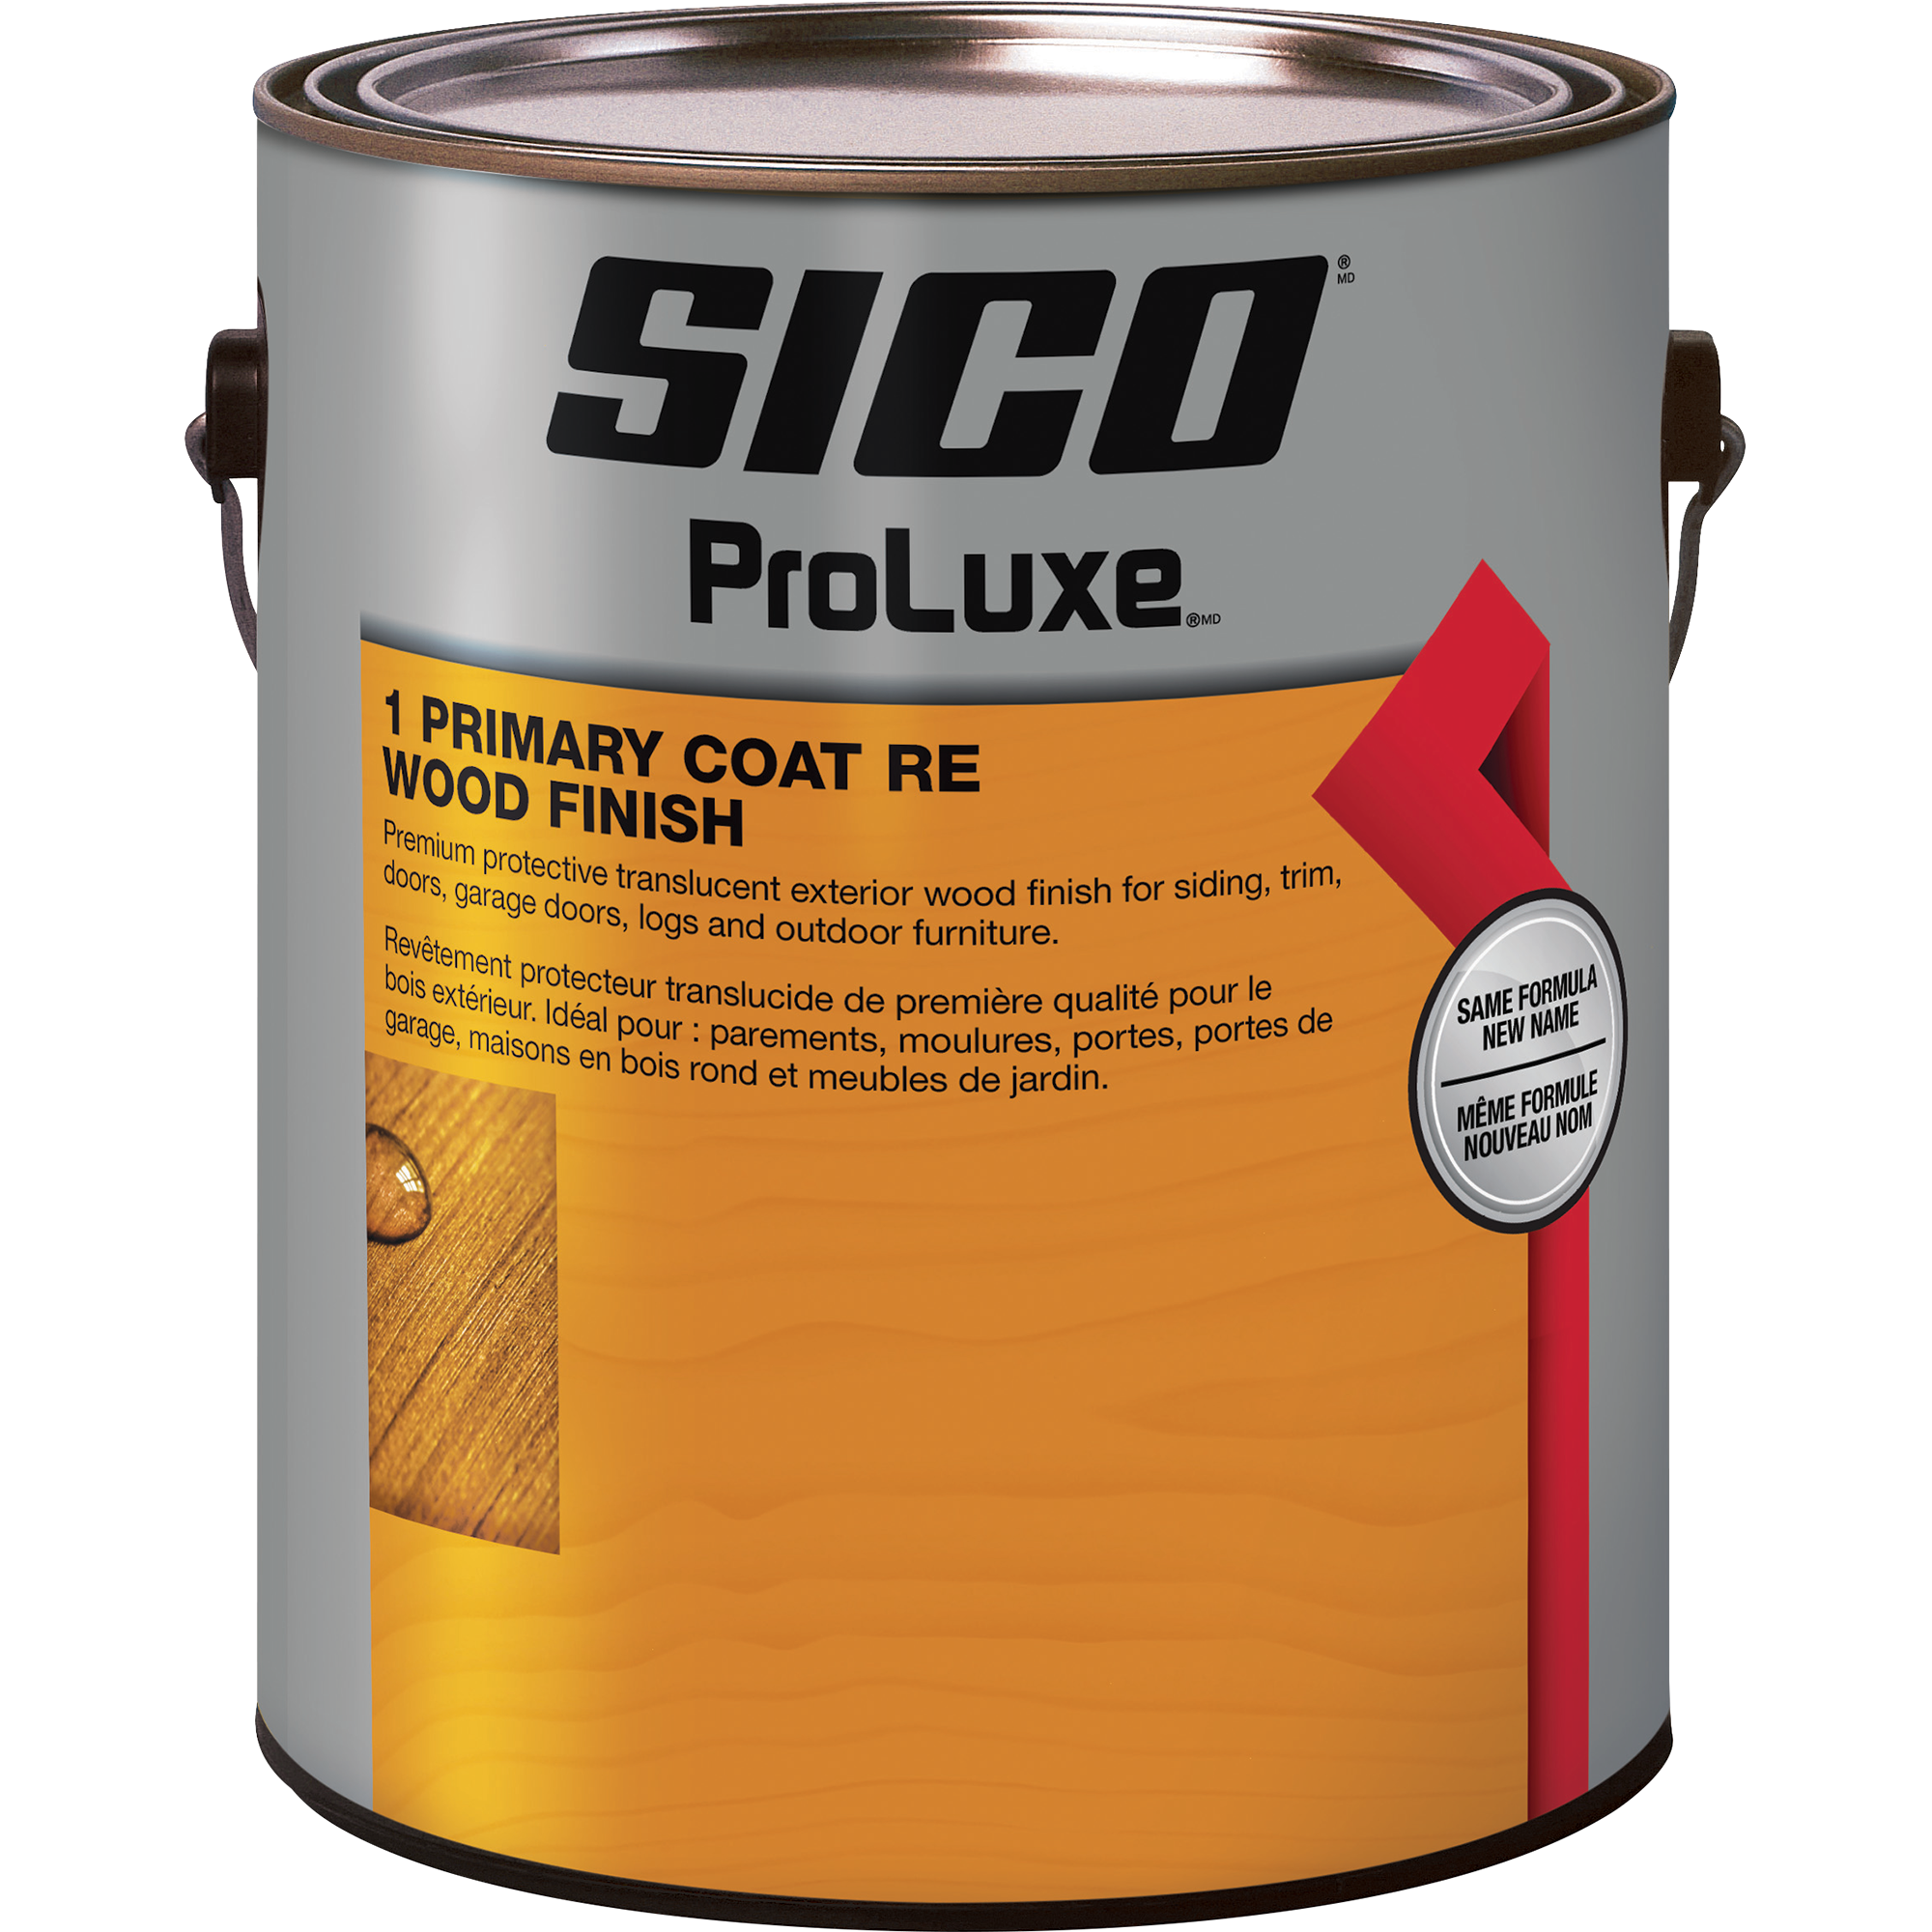 SICO® PROLUXE® 1 PRIMARY COAT RE WOOD FINISH  3.78L